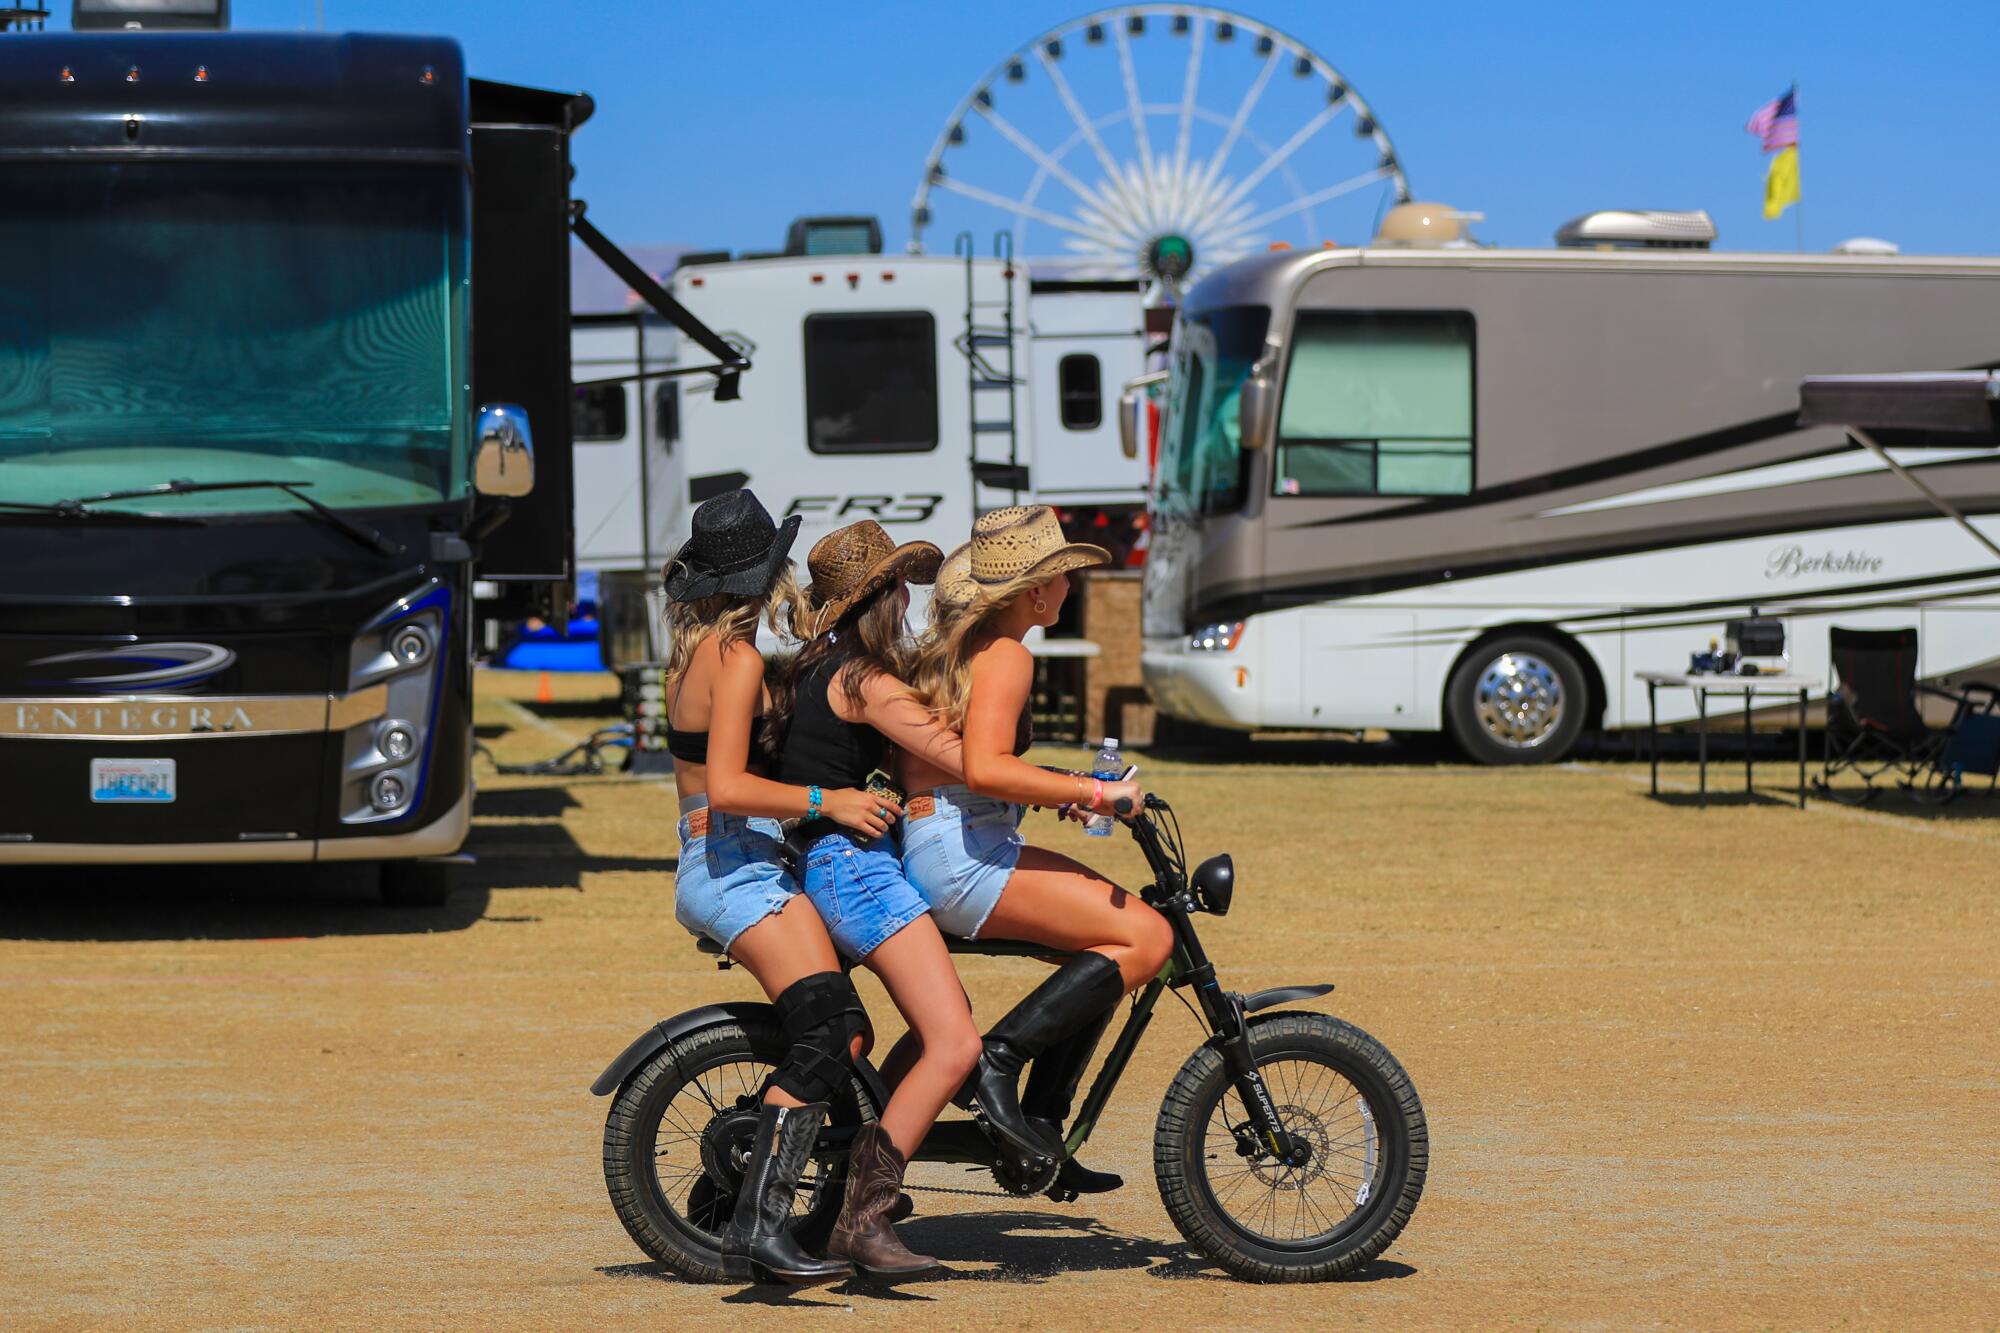 Three women in cowboy boots, hats and shorts ride an electric bike on the Stagecoach campground.